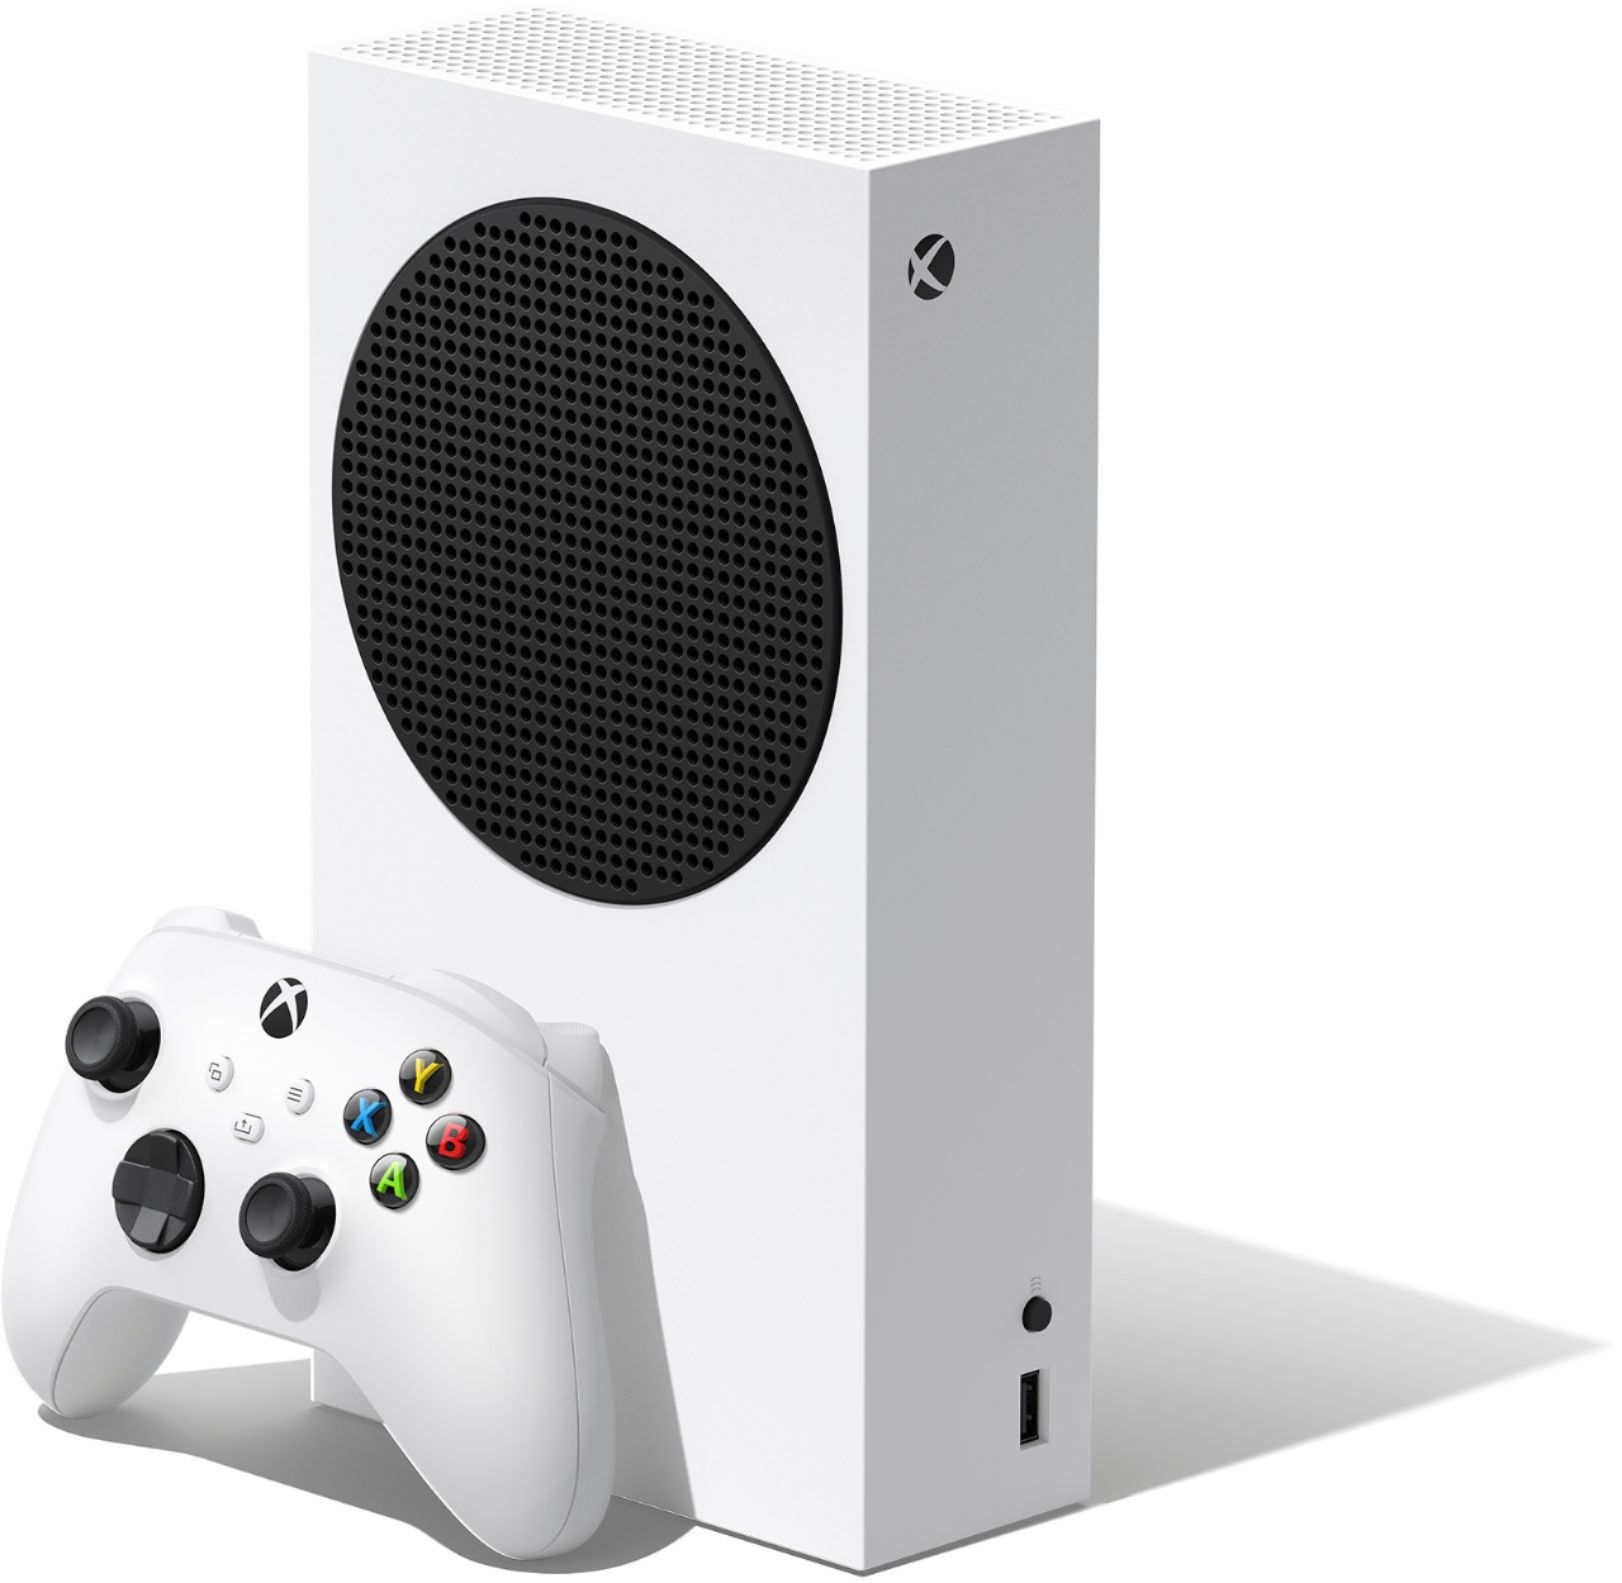 White With HDMI Cable Controller Bundle Disc-free Gaming Robot White Xbox Series S console Microsoft Series S 512 GB All-Digital Console Include：Xbox Wireless Controller 